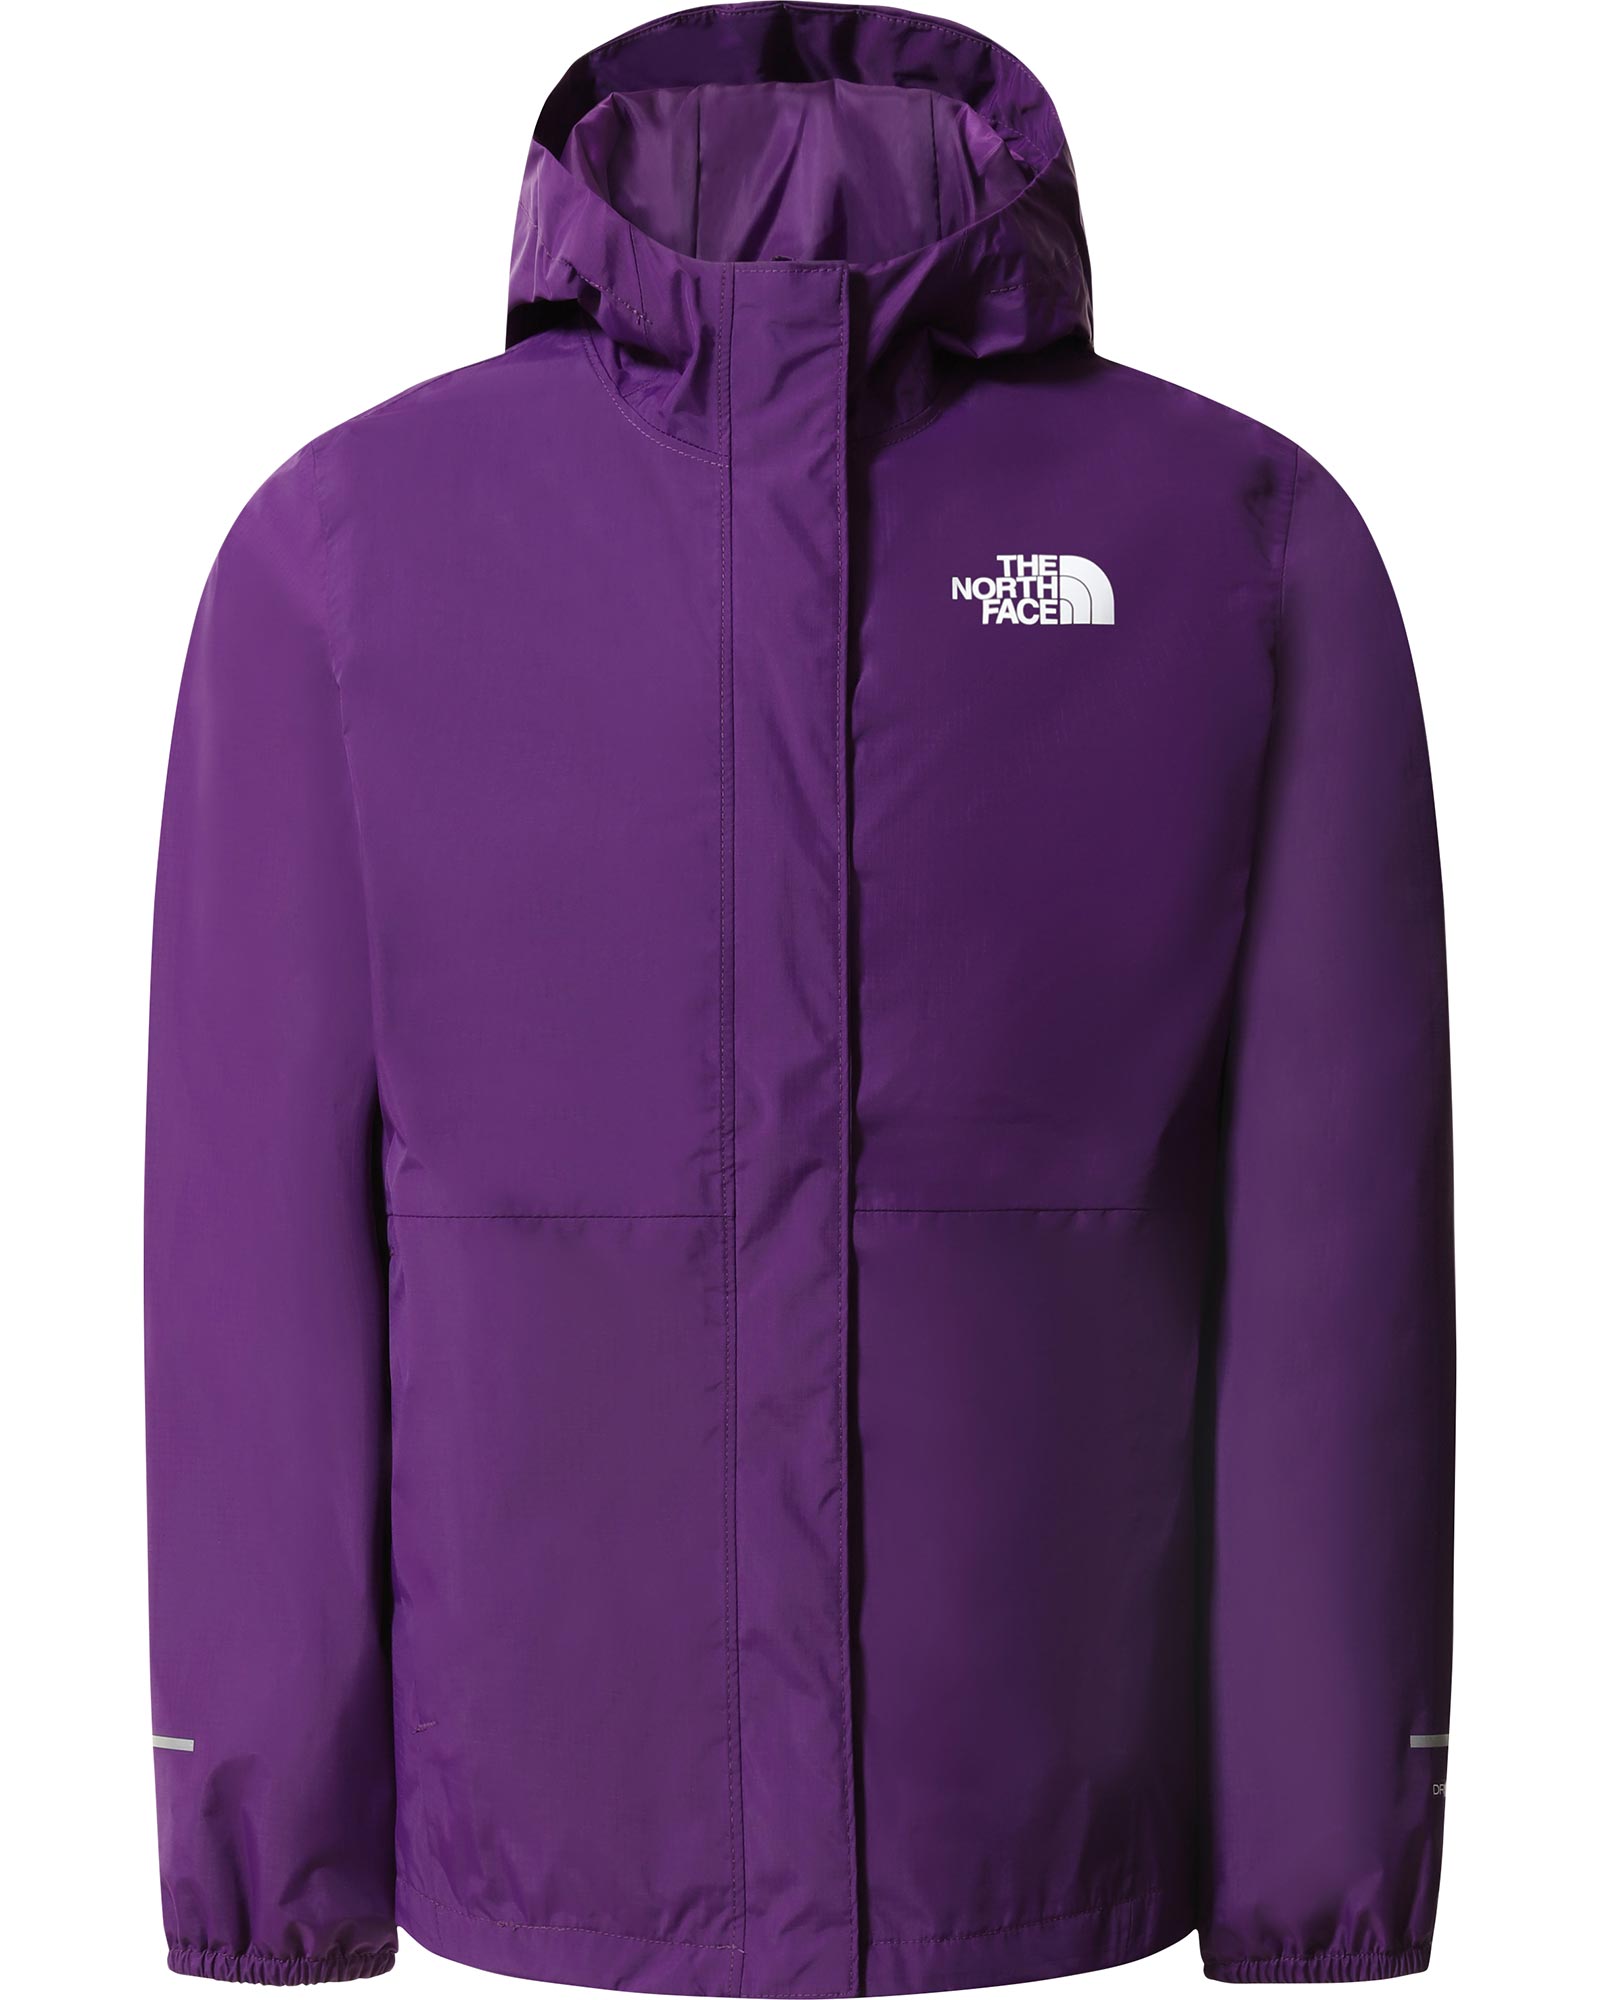 Product image of The North Face Resolve Reflective Girls' Jacket